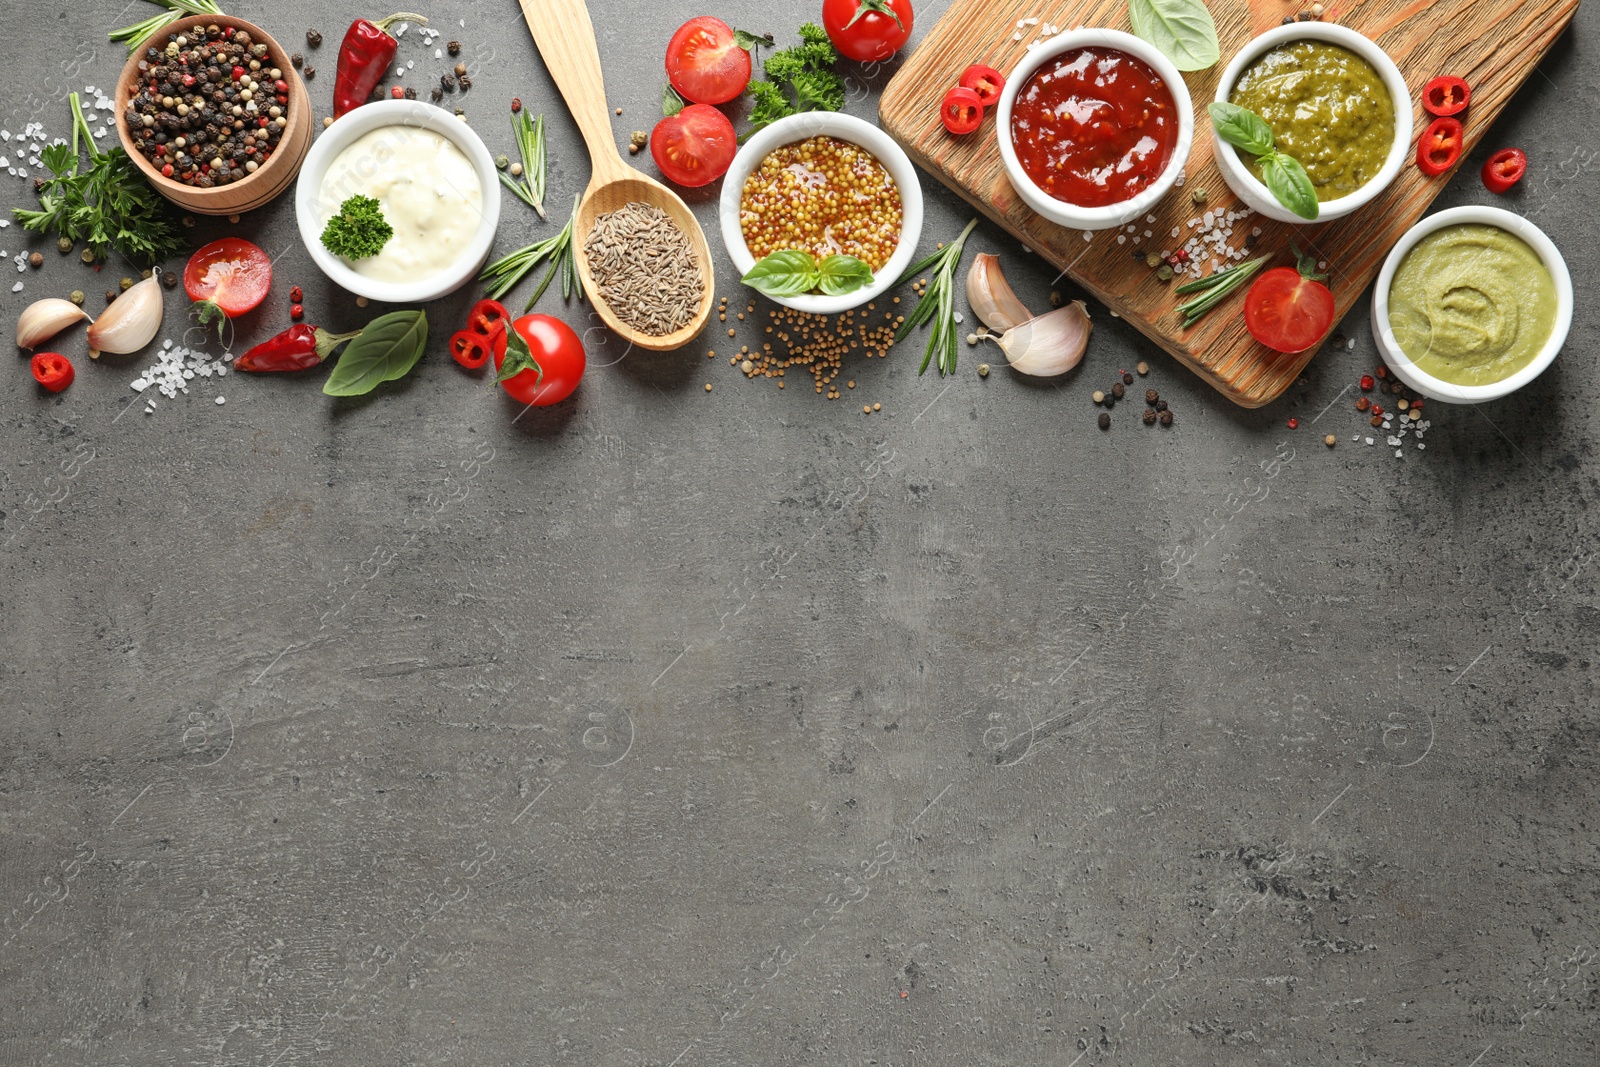 Photo of Flat lay composition with different sauces and space for text on gray background